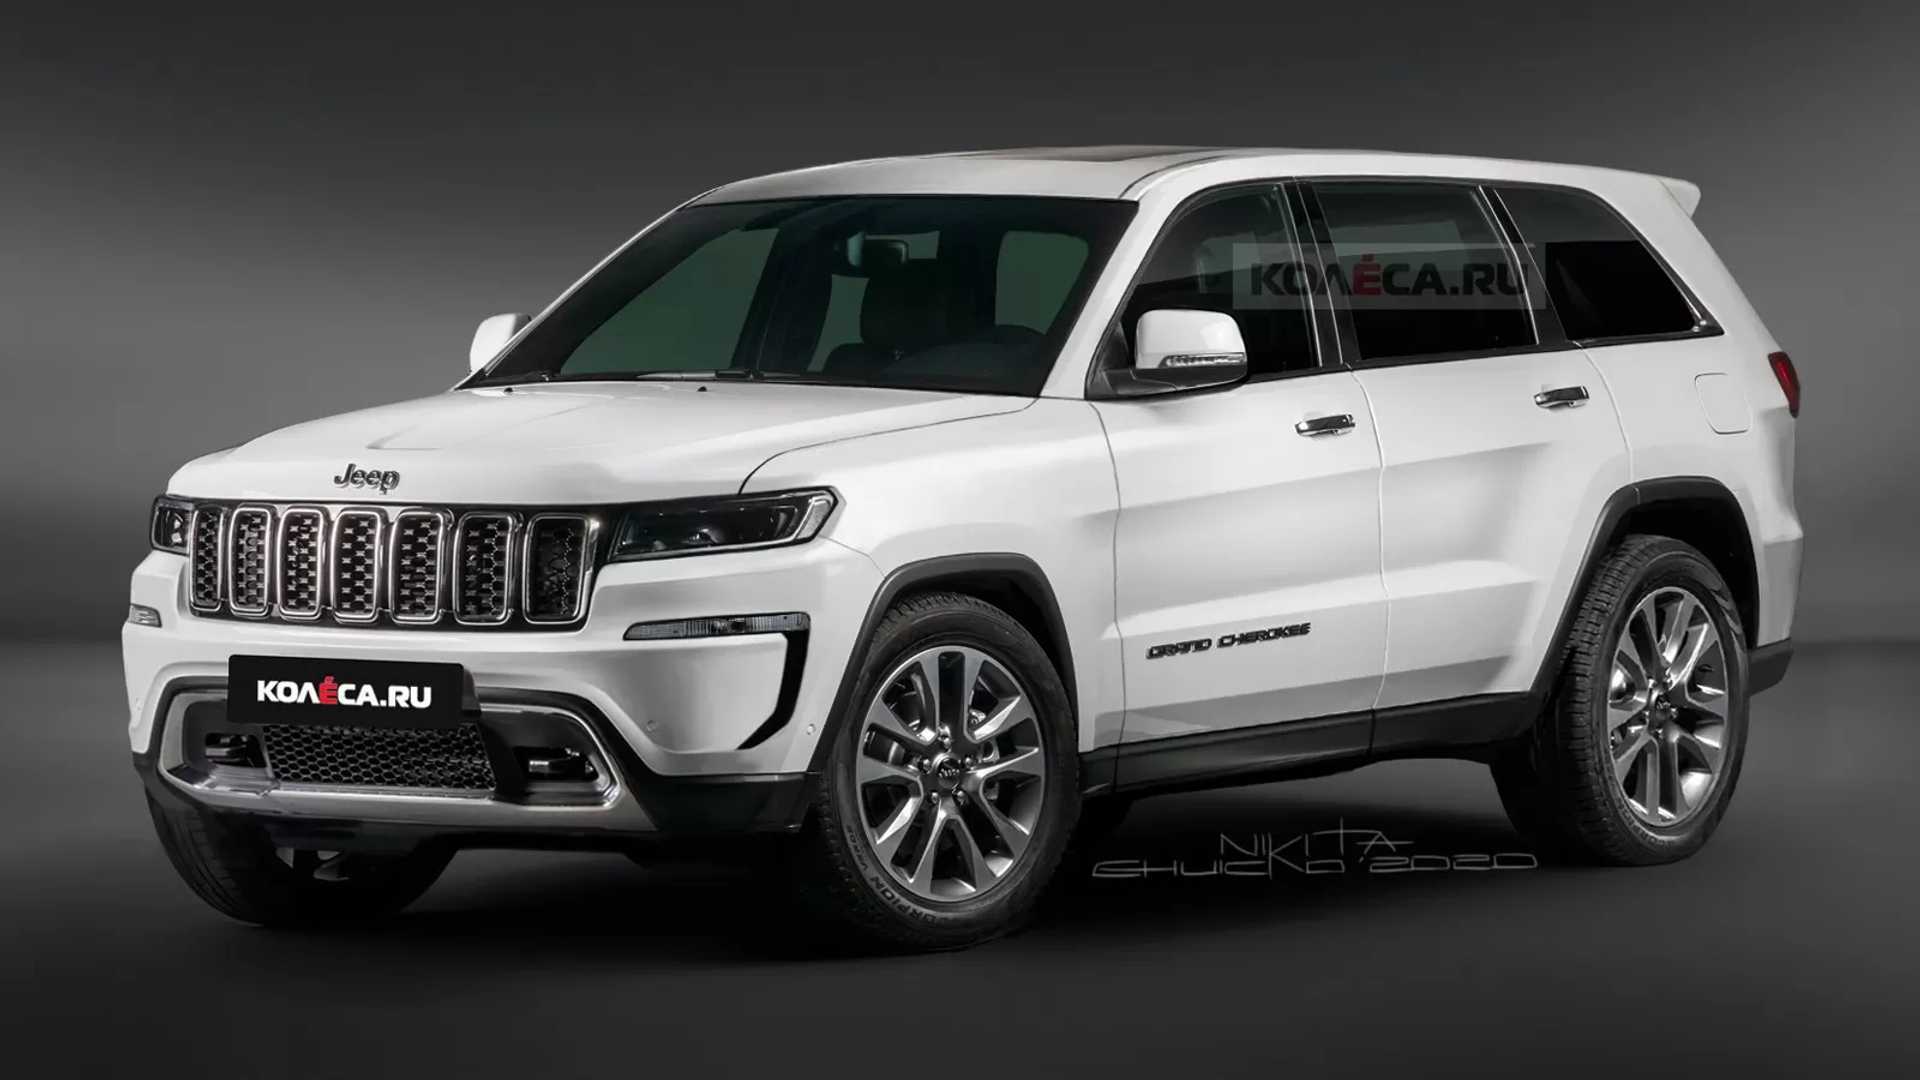 2021 Jeep Grand Cherokee Rendered Showing Sharper Styling